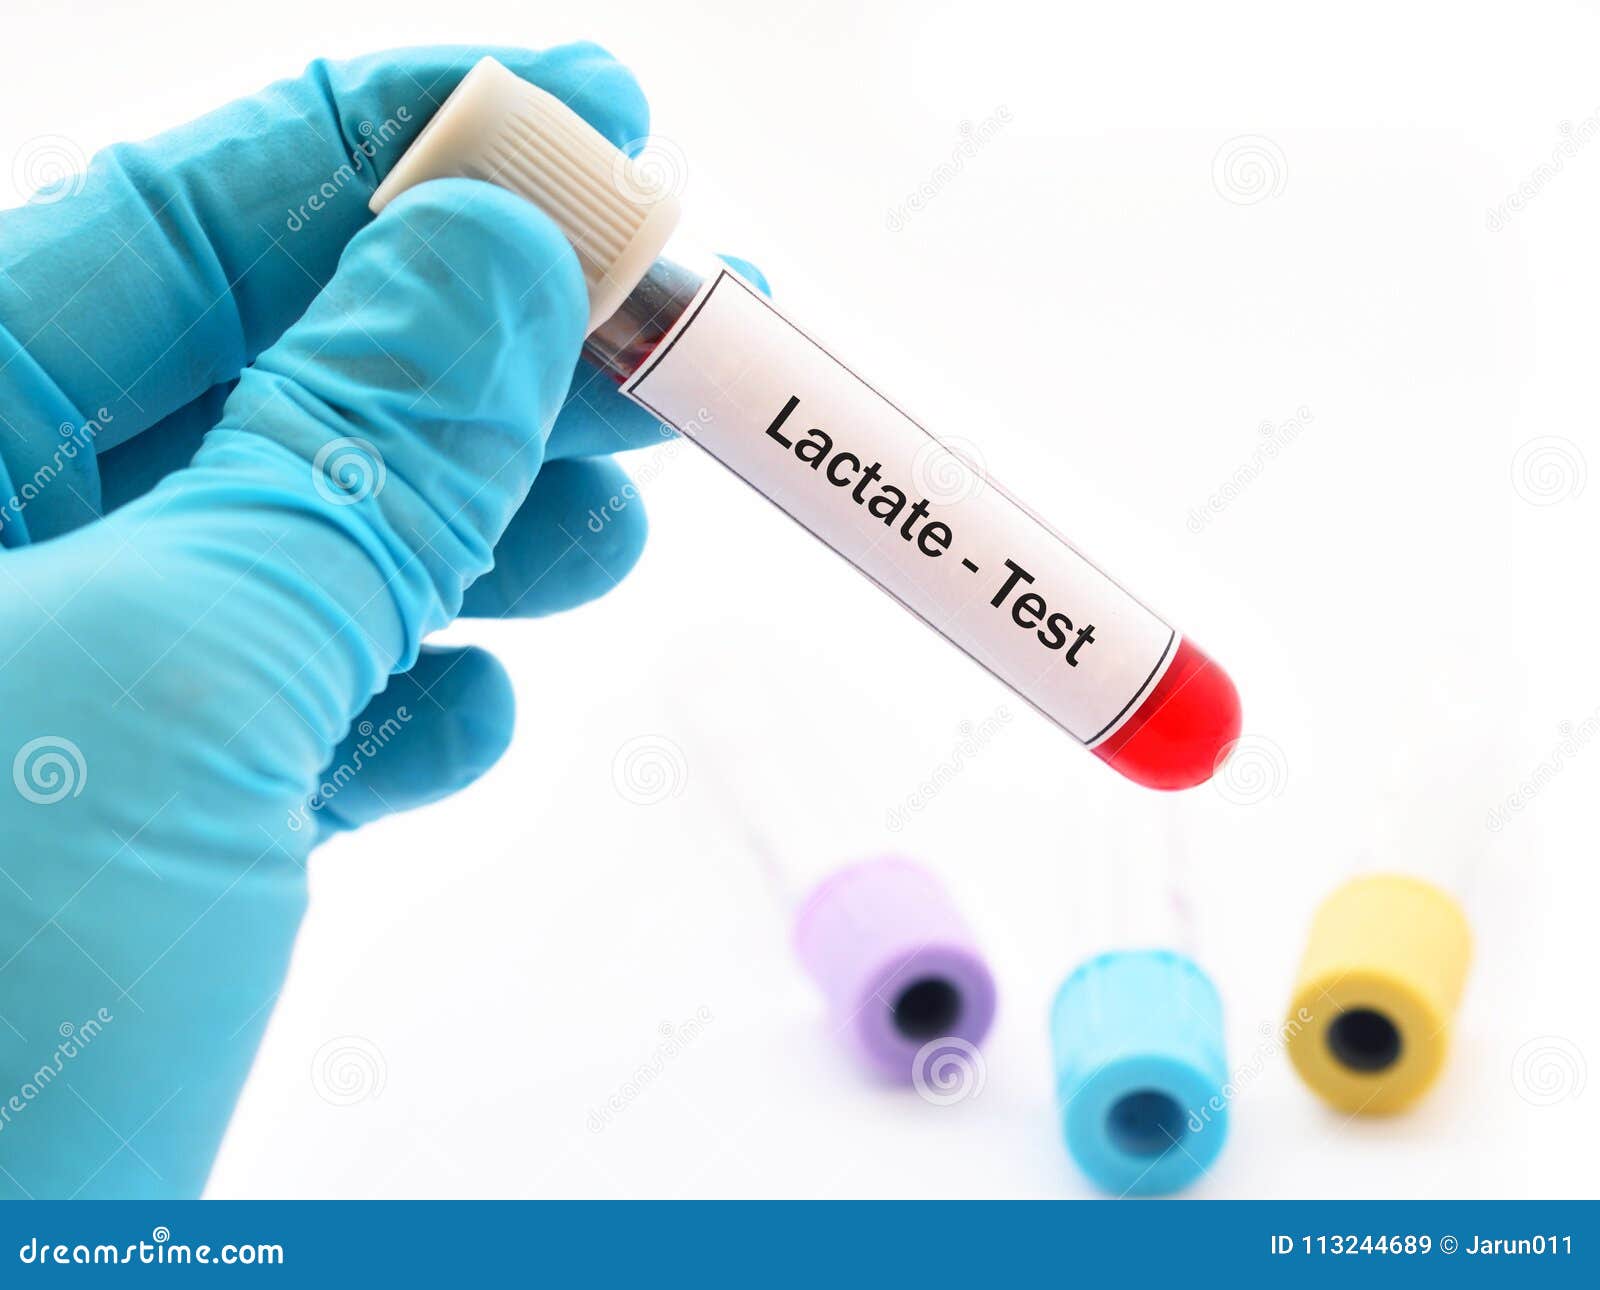 Blood for lactate test stock image. Image of sample 113244689